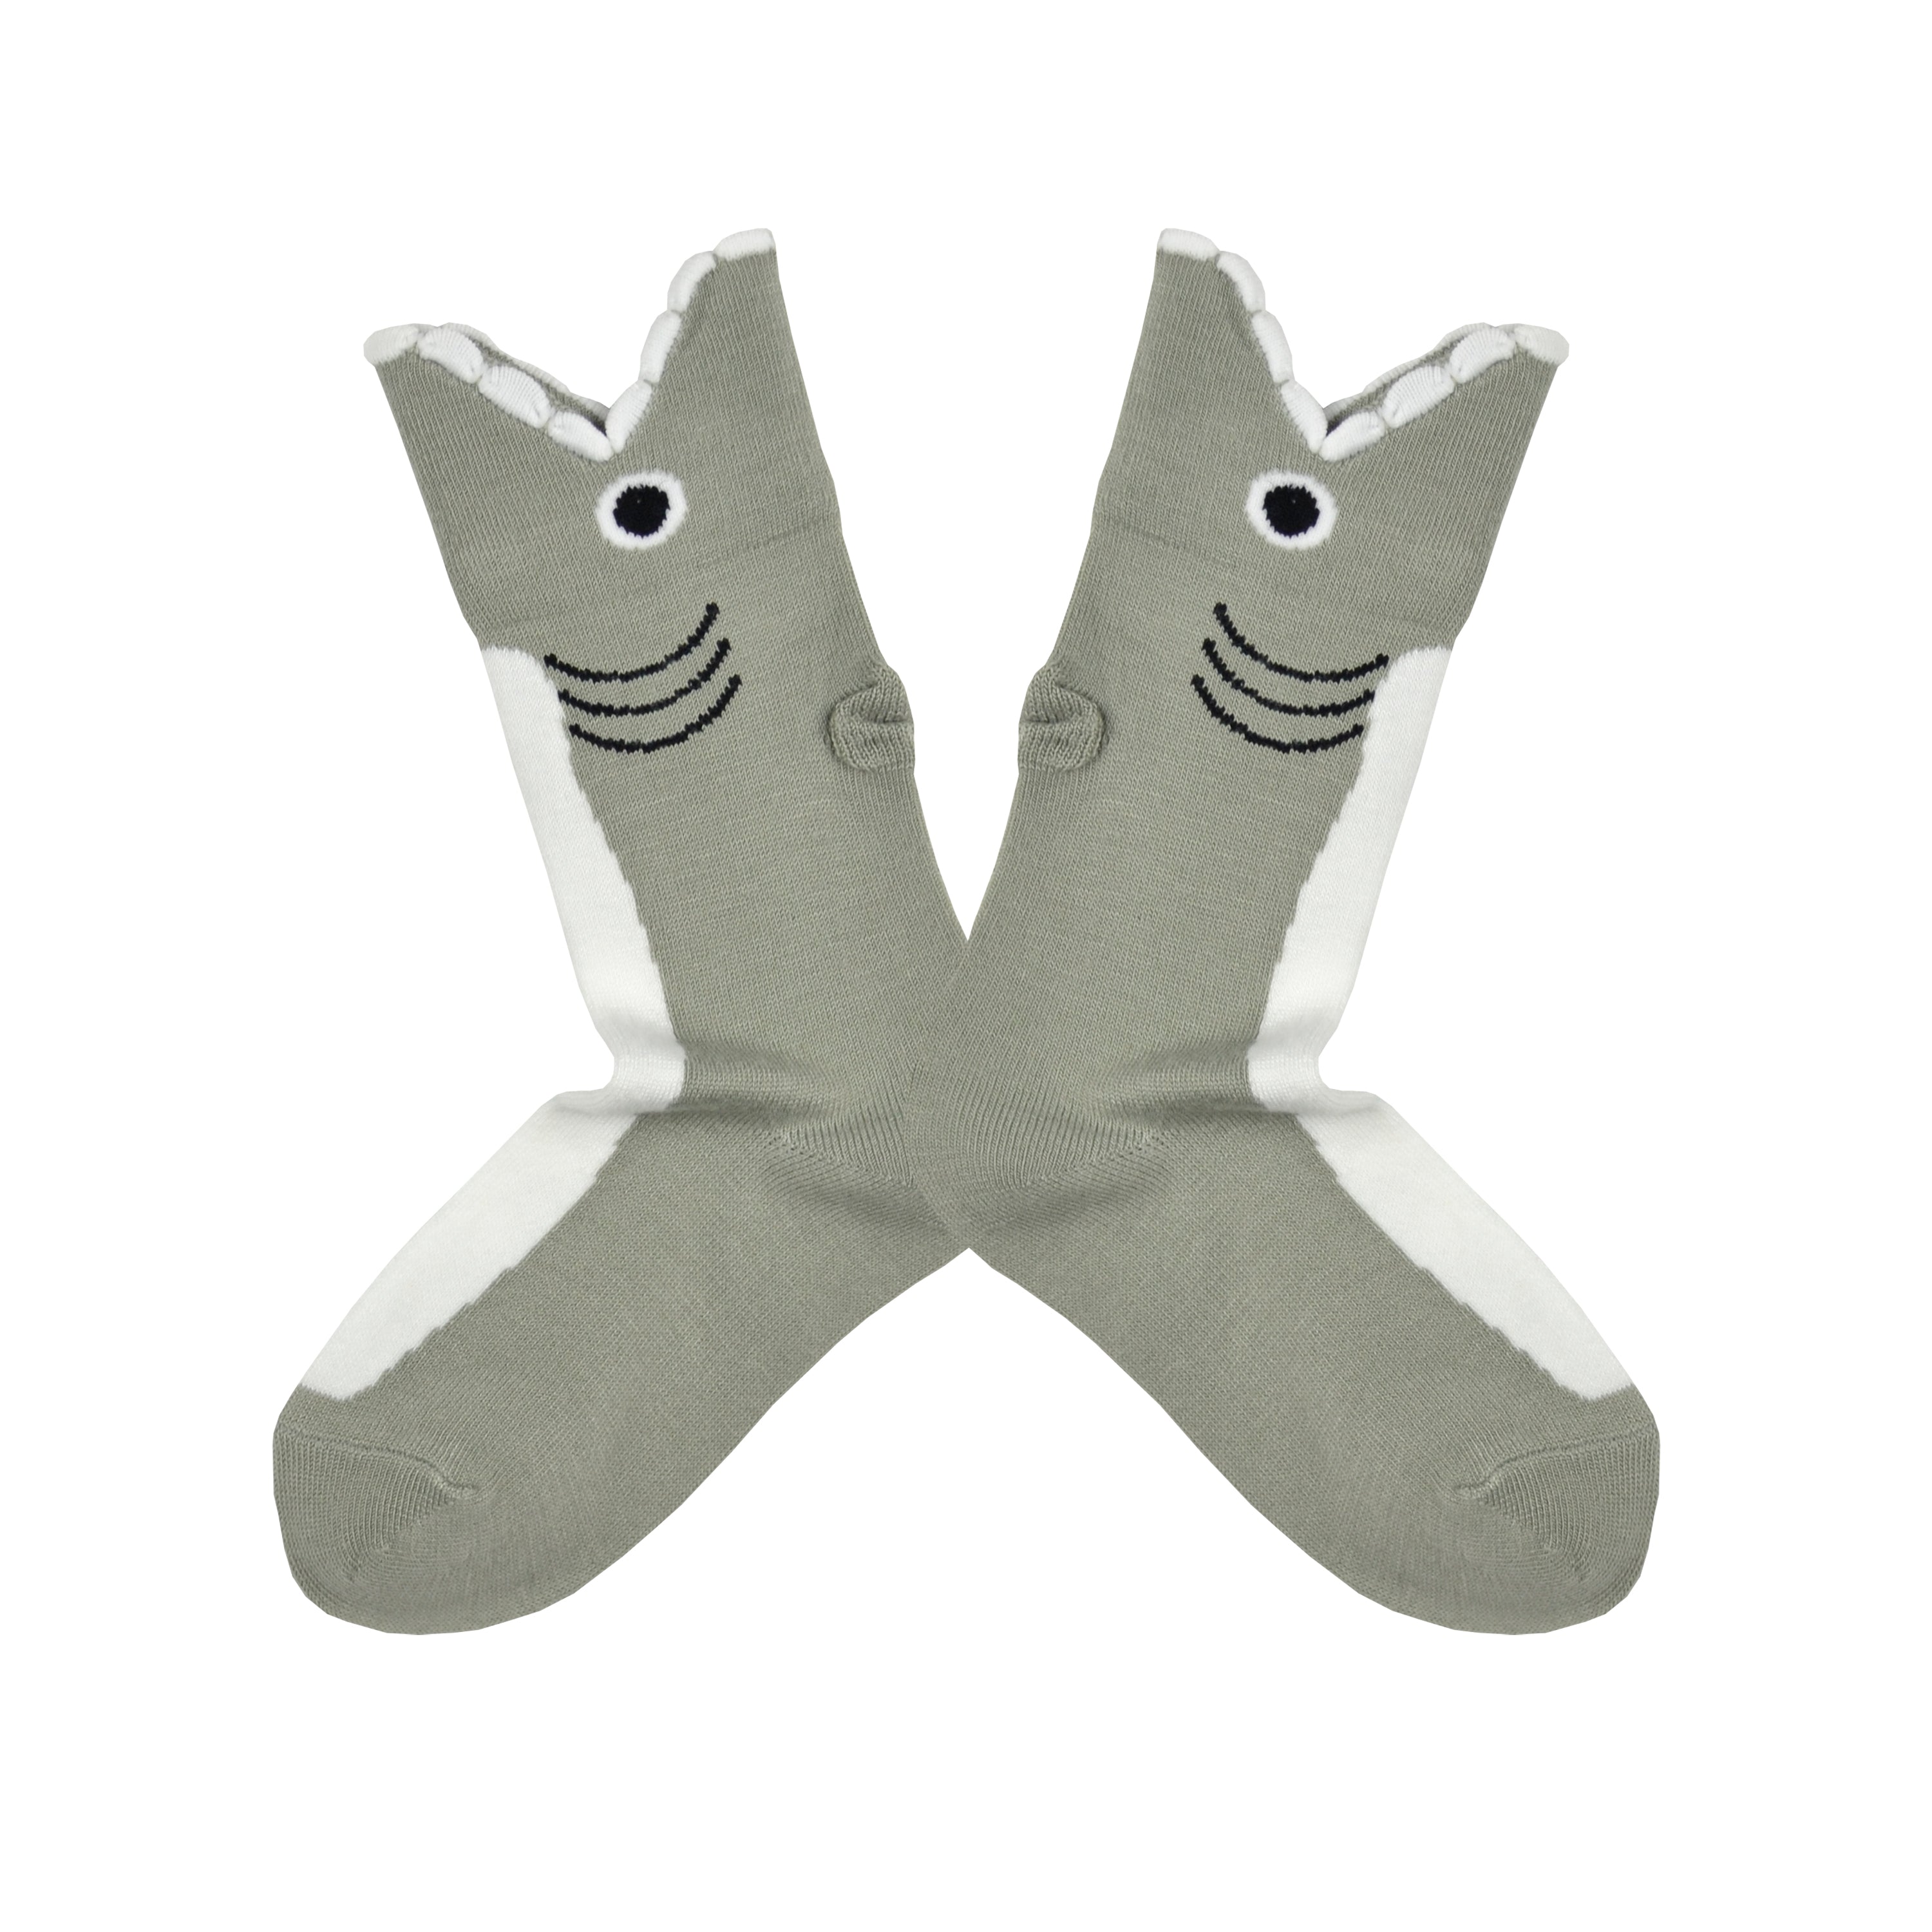 Shown in a flatlay, a pair of K.Bell brand kids crew socks in grey. The top of the sock features a fish mouth cuff on a grey sock with a white front.